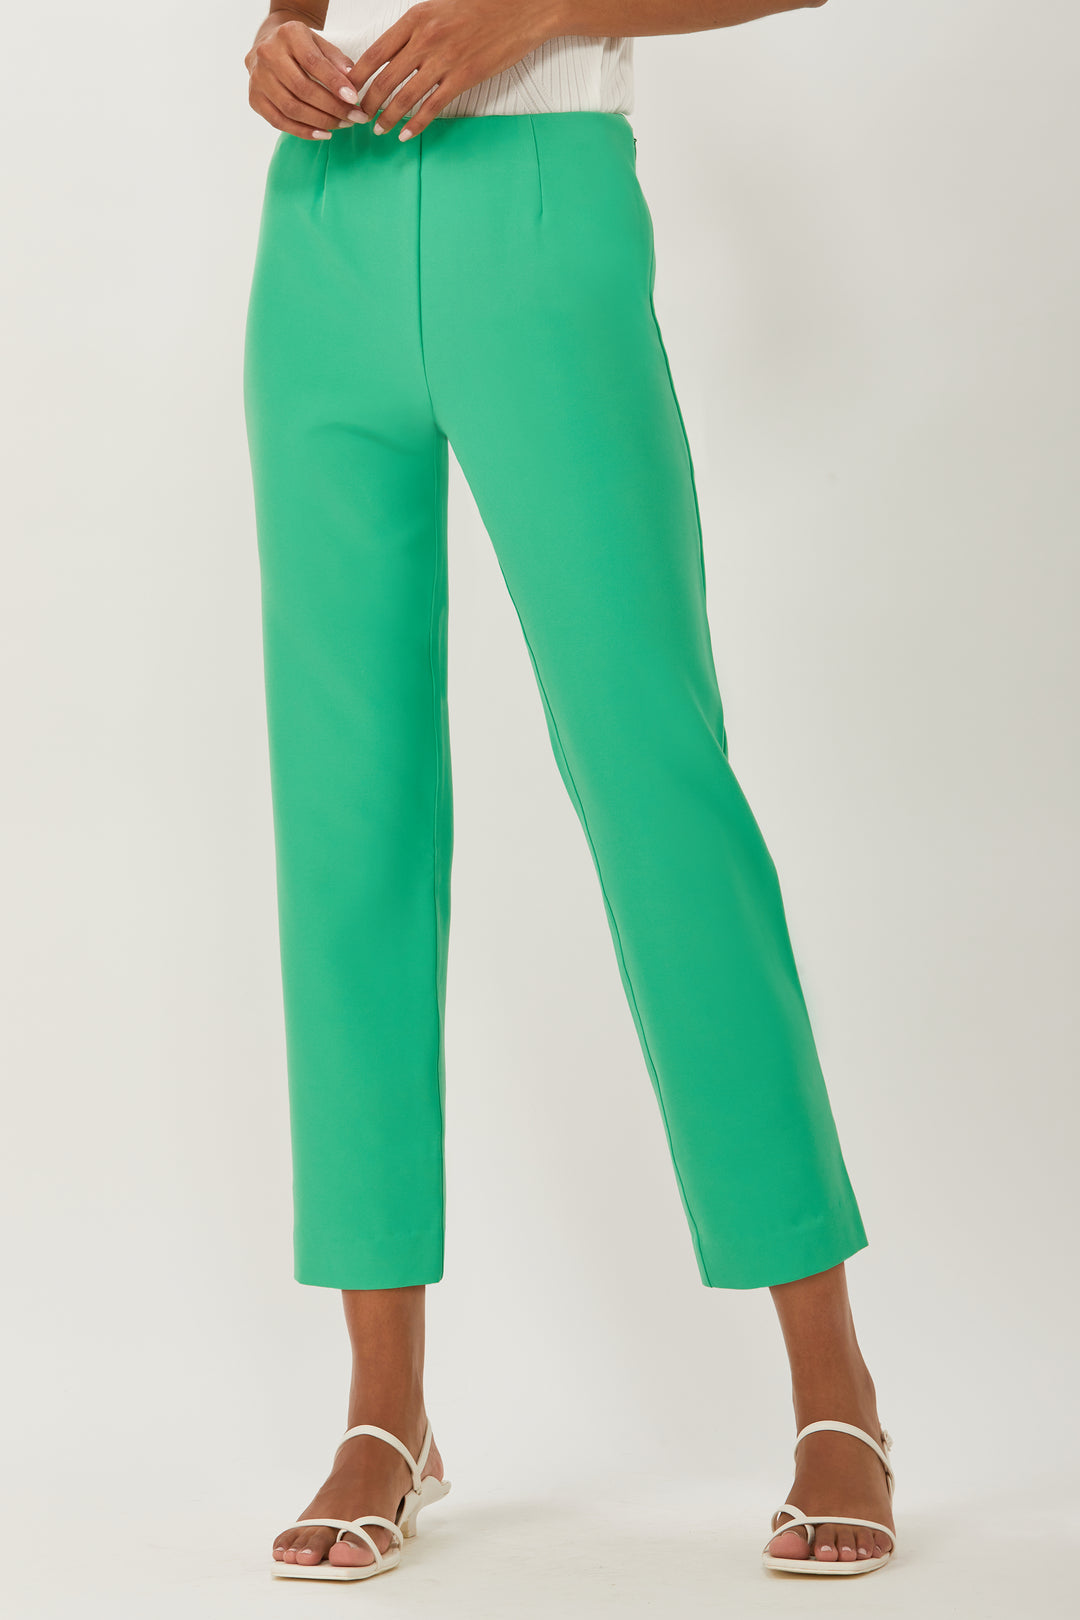 Sutton Cropped Cigarette Pant - Spring Green